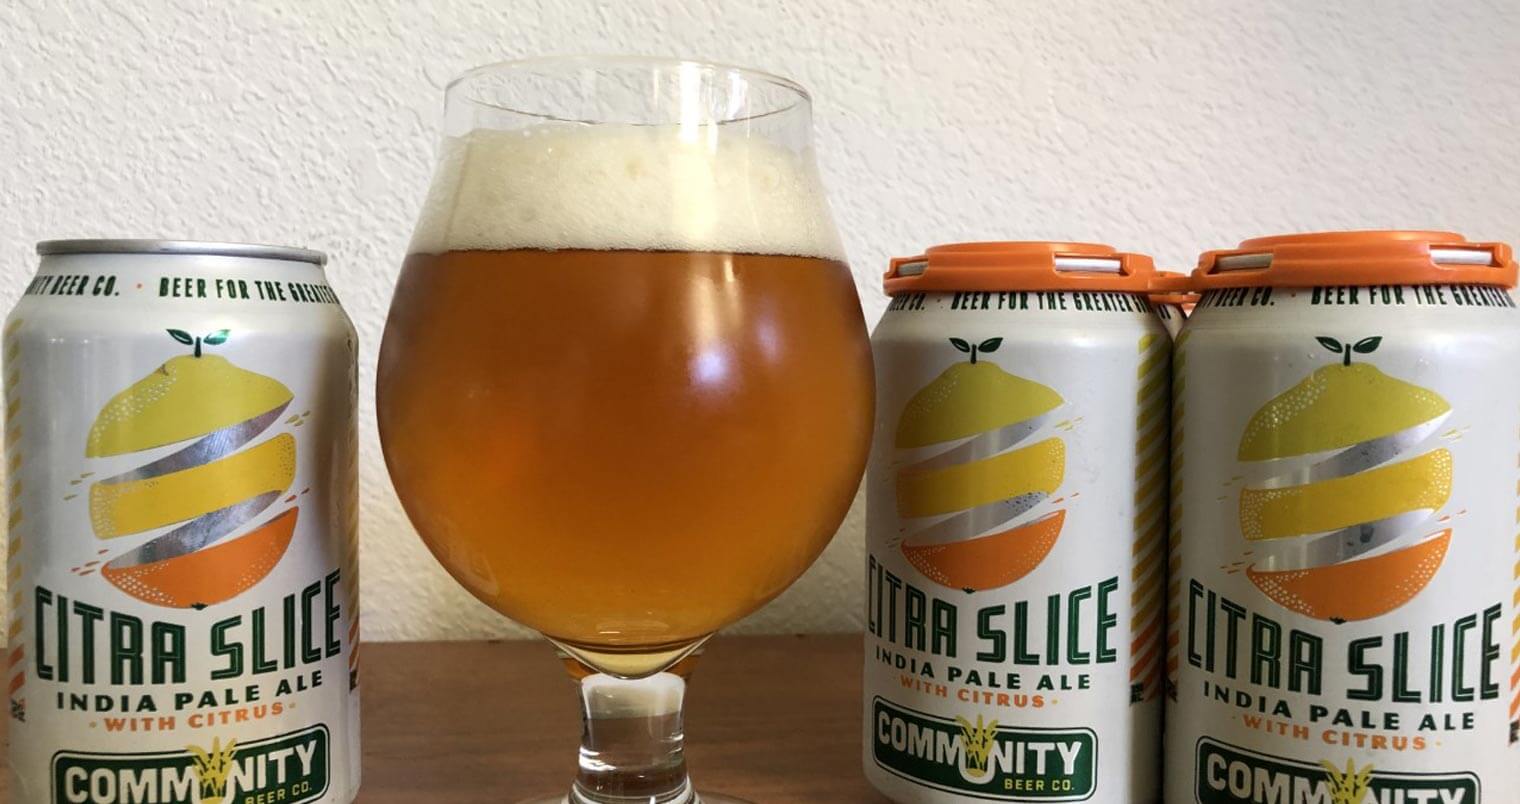 Community Beer Company Citra Slice IPA, featured image